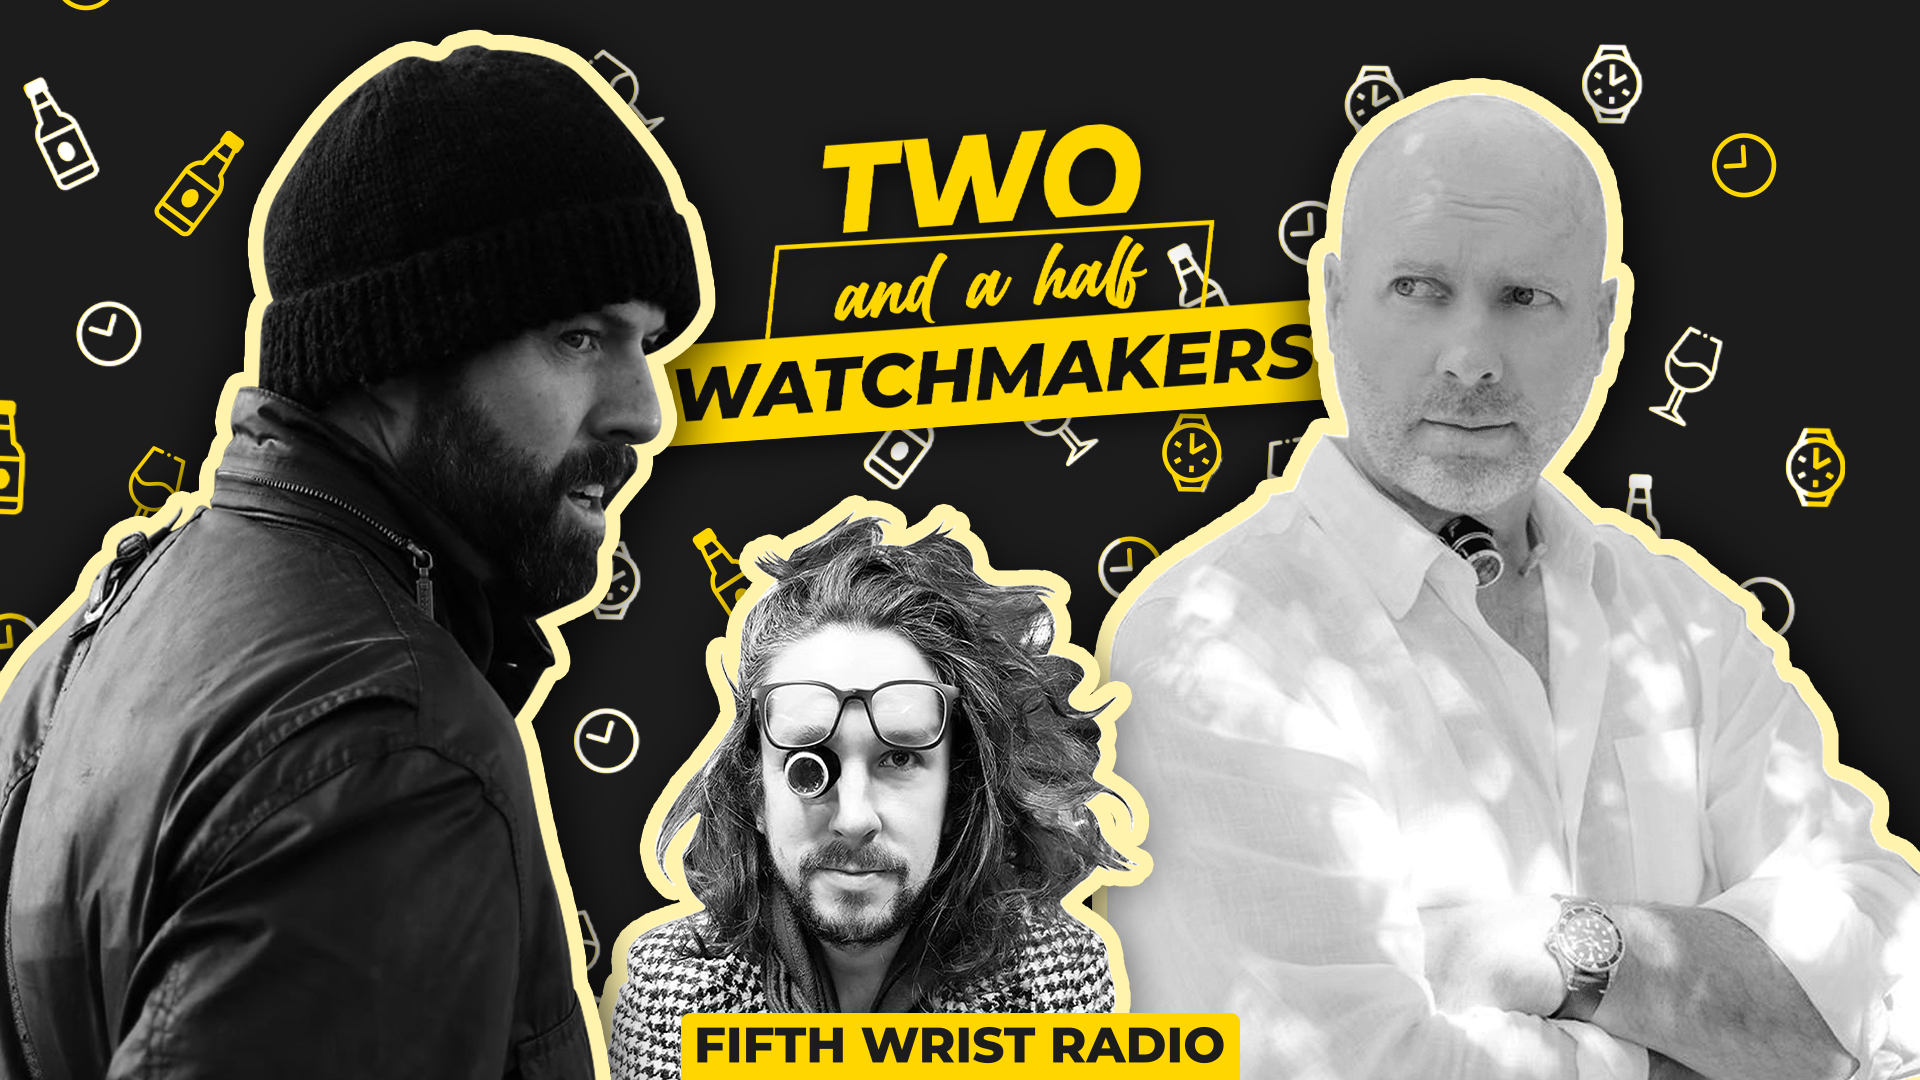 2.5 Watchmakers – The Supreme brick of podcasts